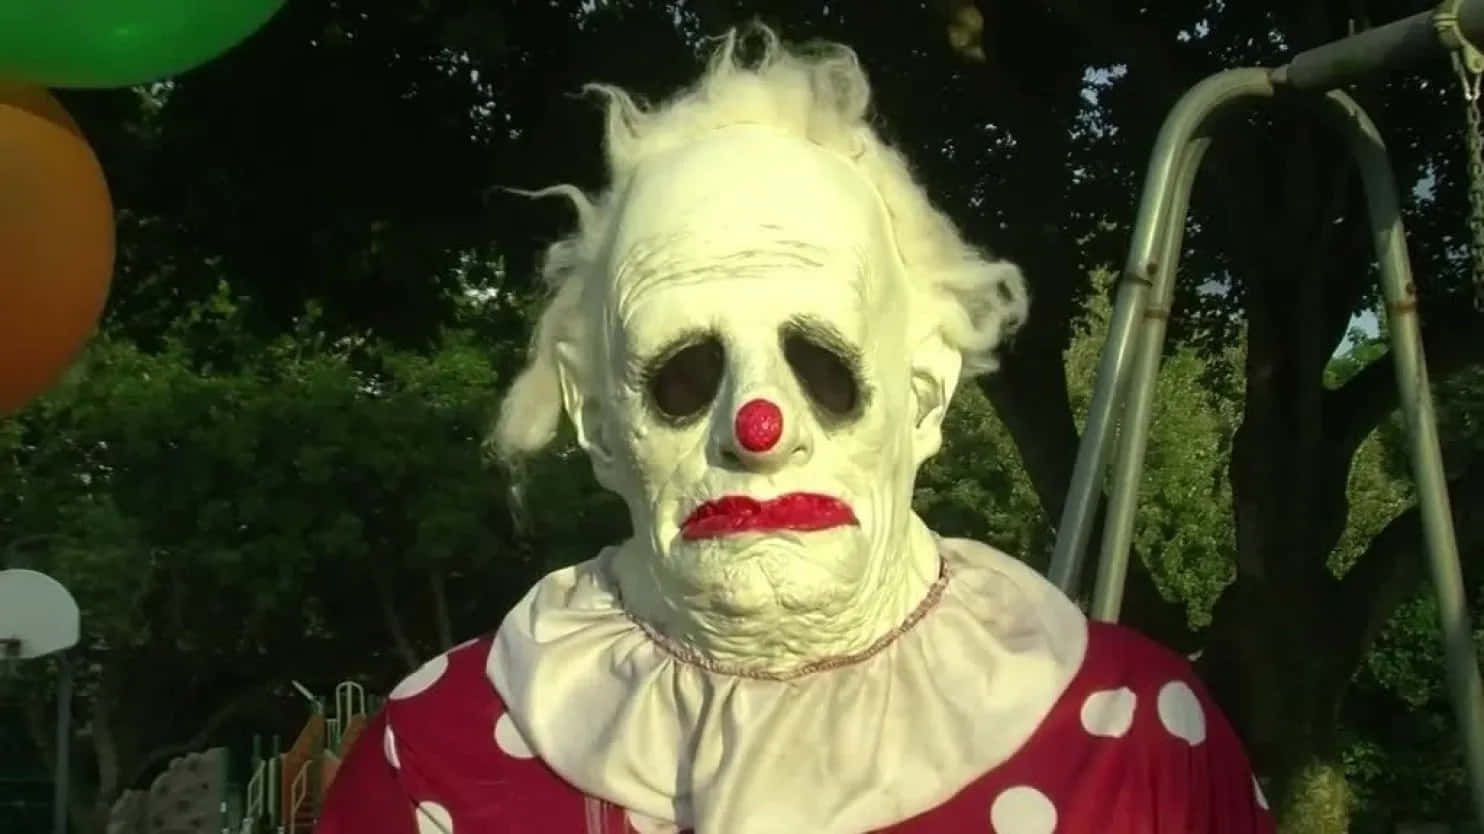 Feeling Frightened by this Creepy Clown